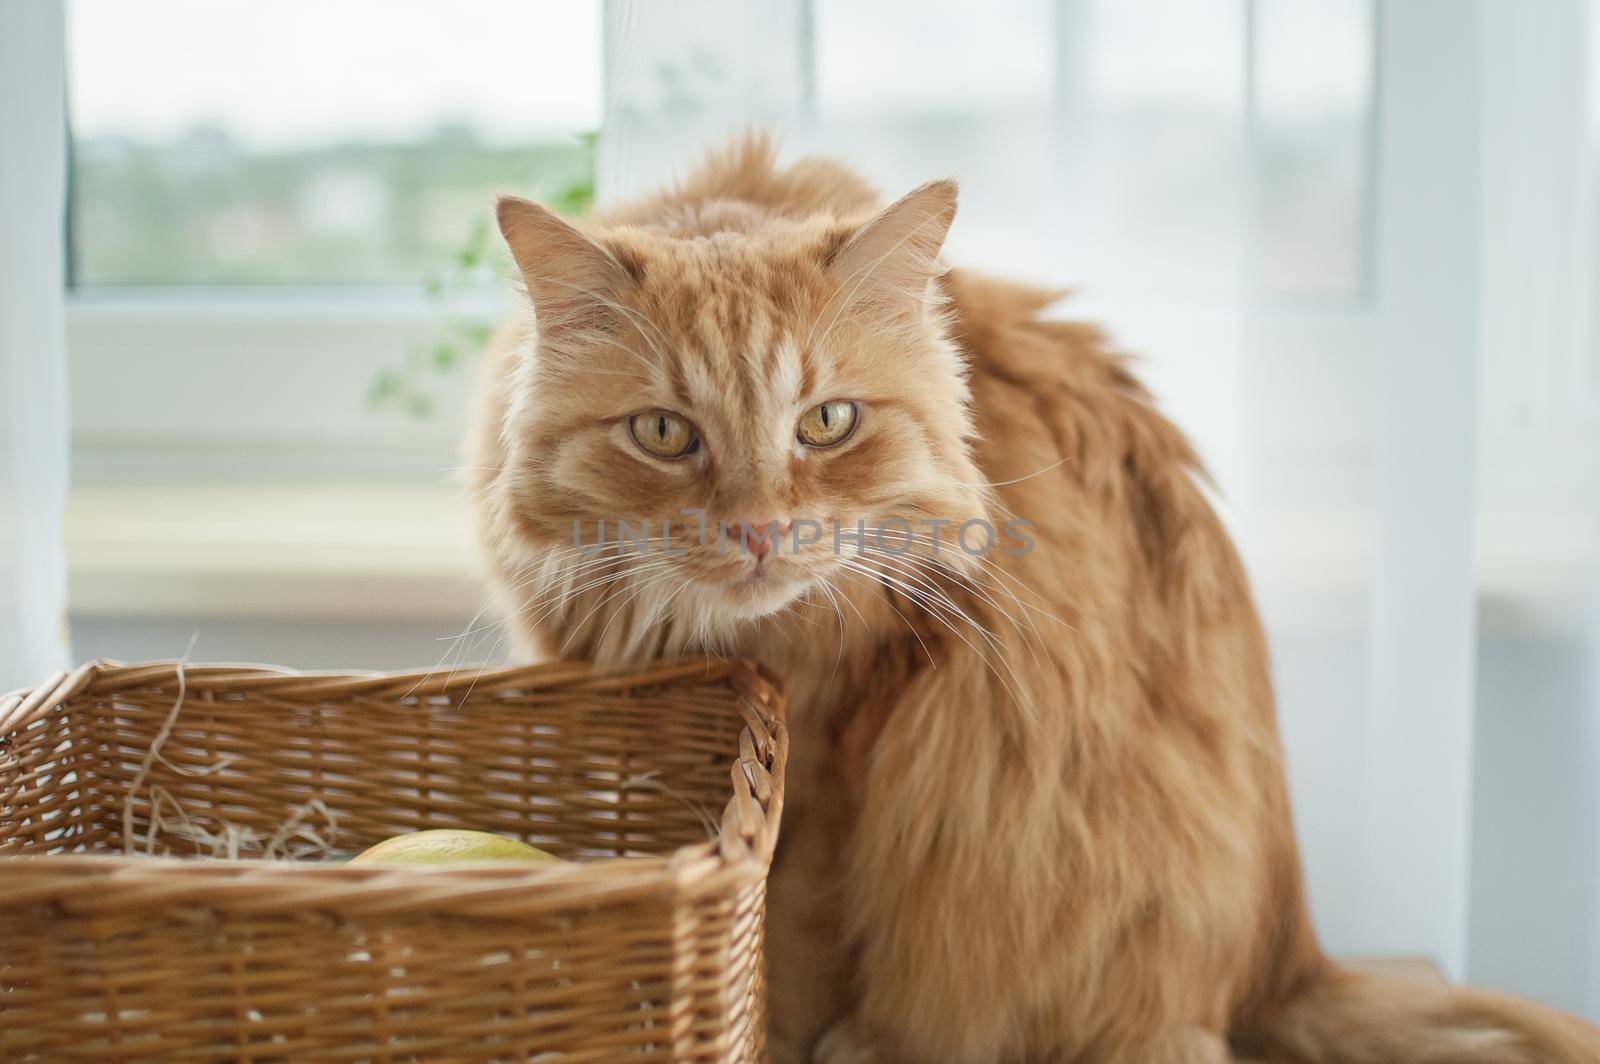 Red young cat is sitting on window background near straw basket, domestic pets concept.